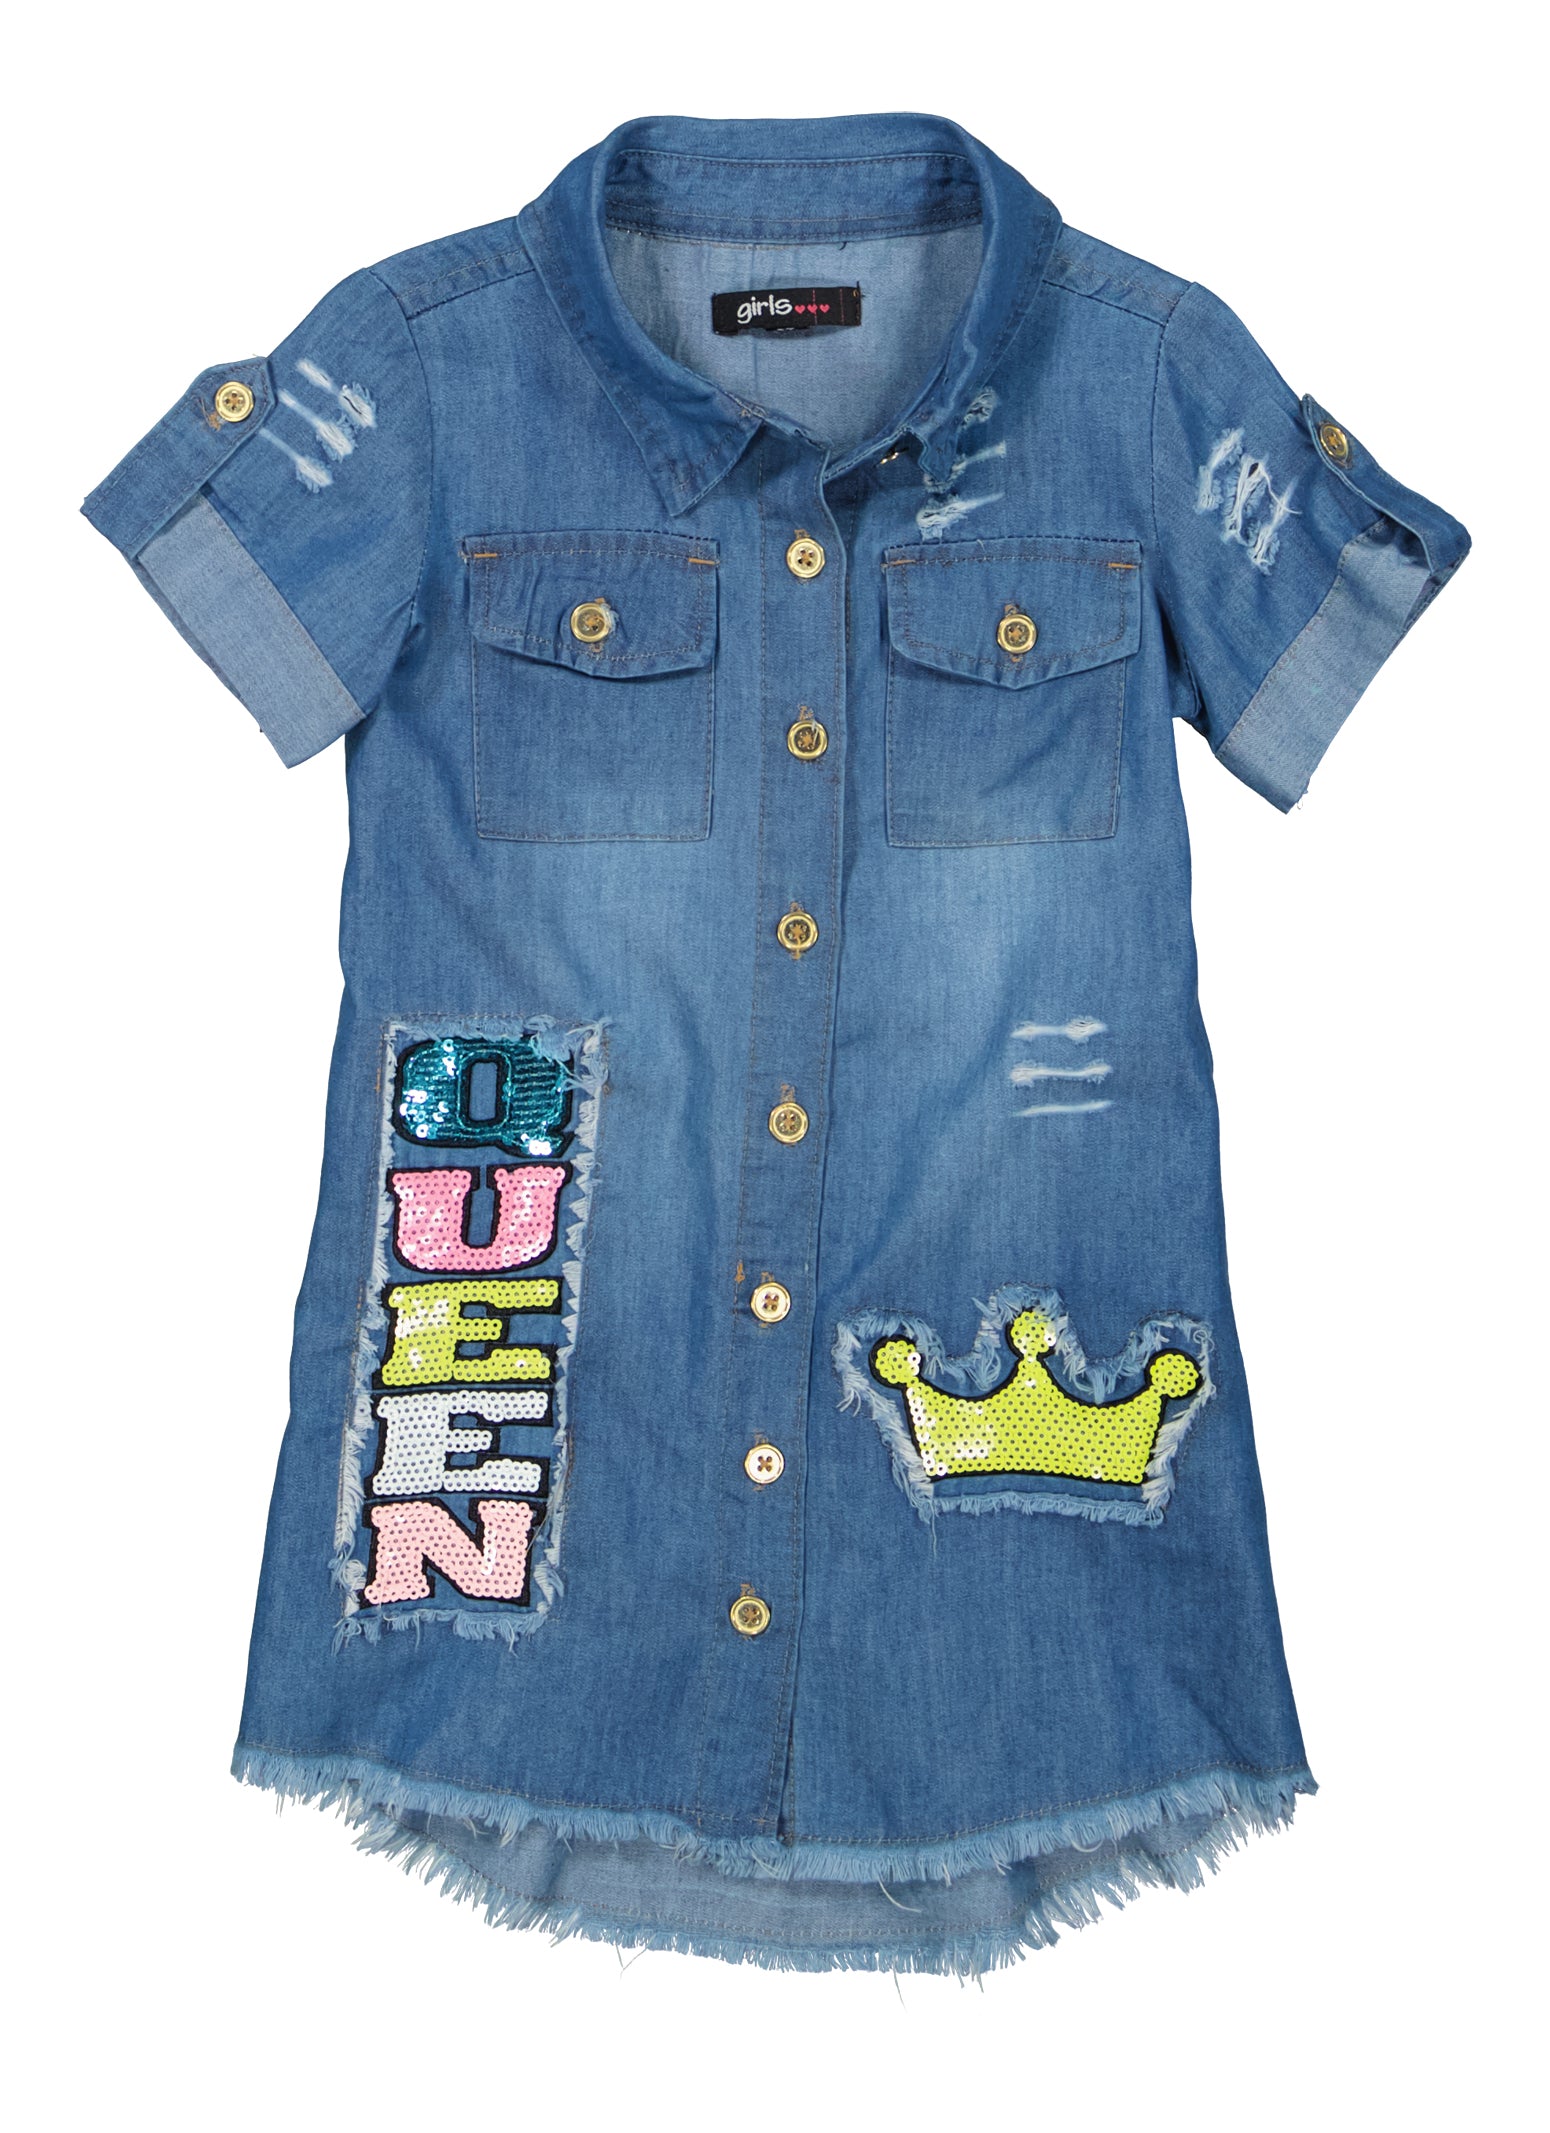 2pcs Toddler Girl Long-sleeve Ribbed White Tee and Button Design Belted Denim  Dress Set Only $20.99 PatPat US Mobile